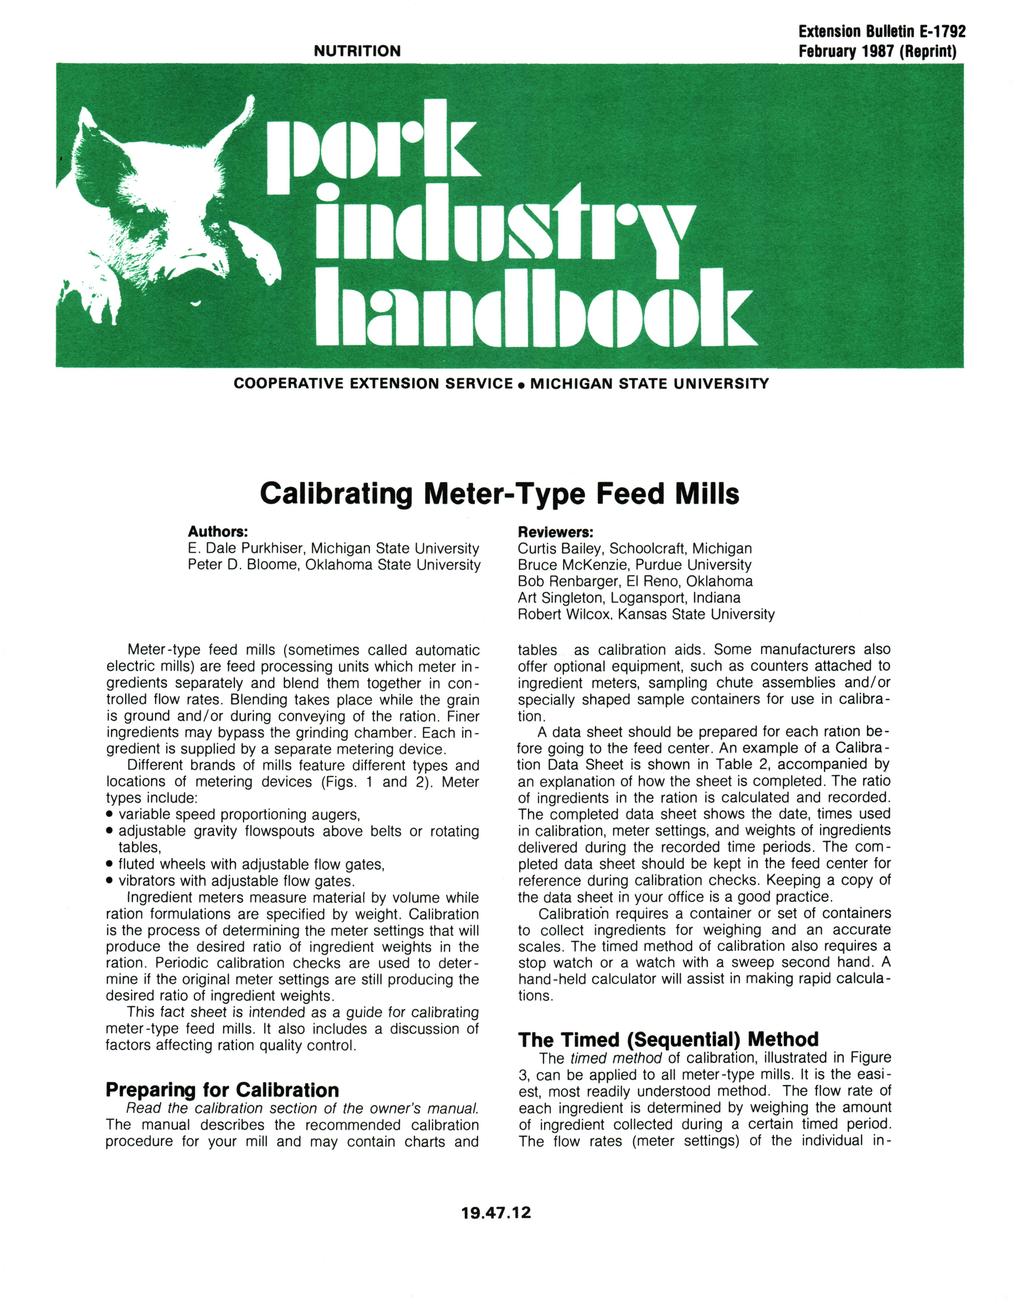 Extension Bulletin E-792 February 987 (Reprint) NUTRITION COOPERATIVE EXTENSION SERVICE. MICHIGAN STATE UNIVERSITY Calibrating Meter-Type Feed Mills Authors: E.